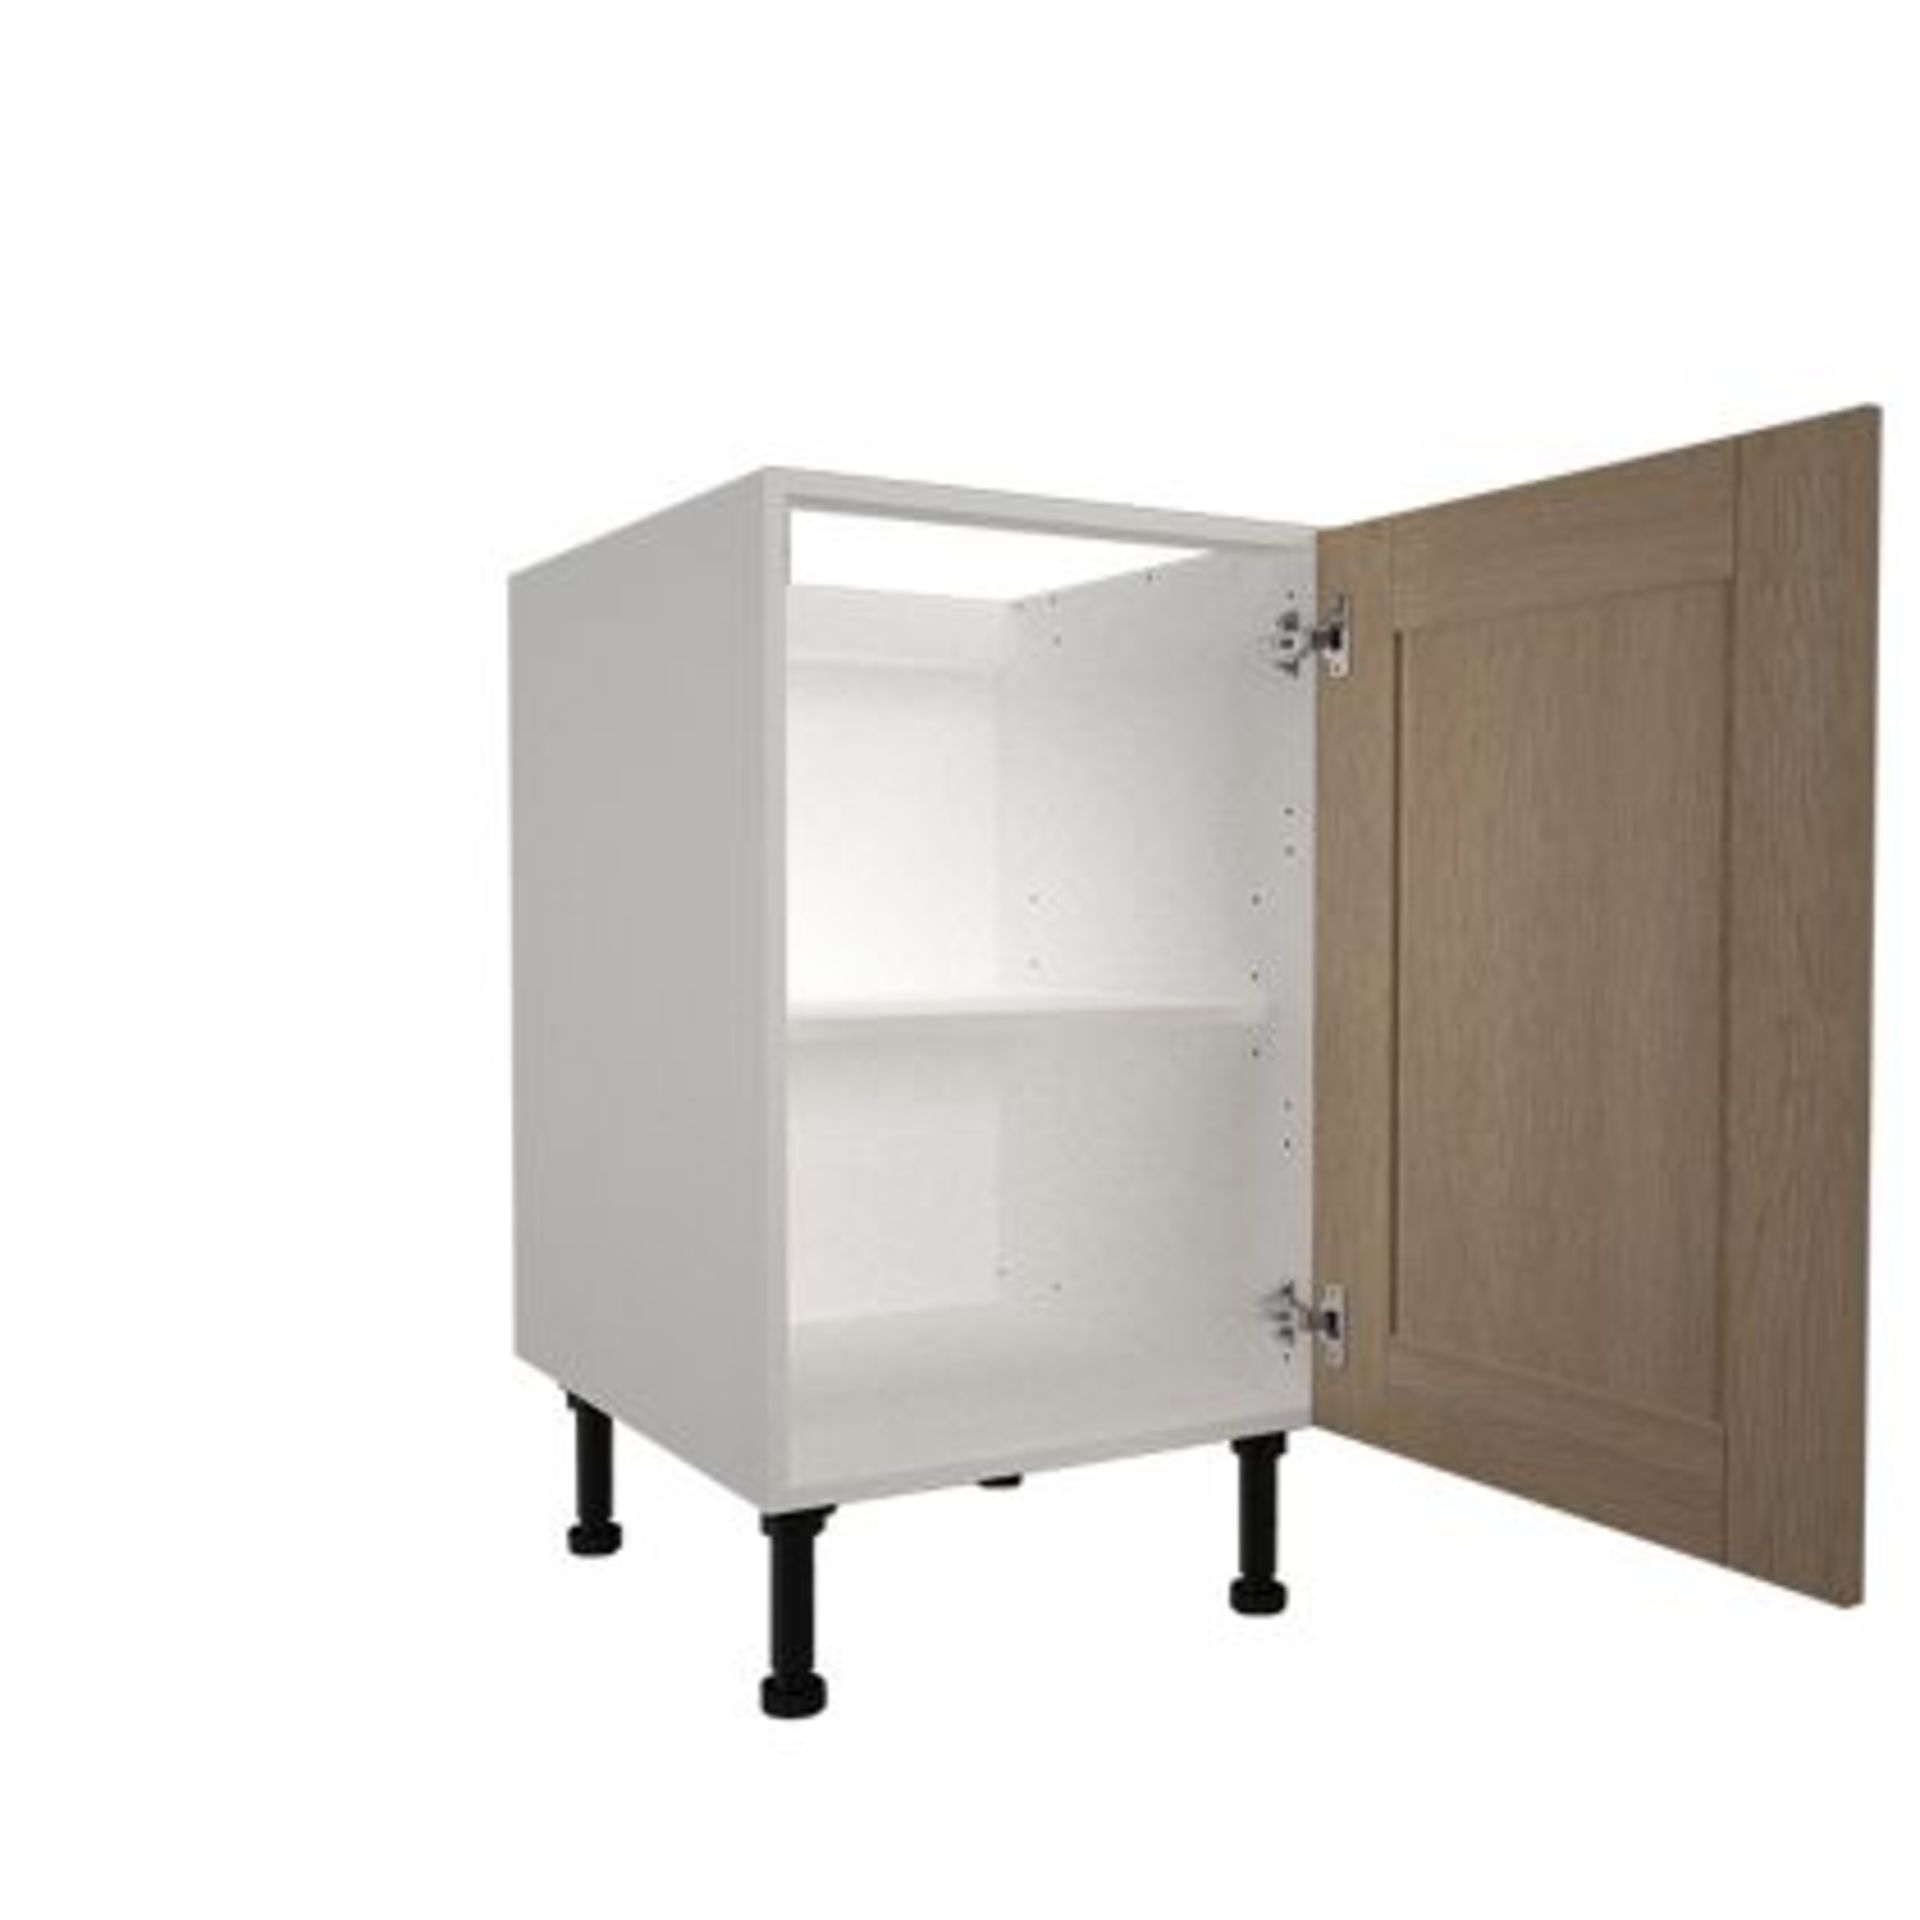 500mm BASE CABINET  WITH HILINE DOOR  - White kitchen cabinet with  light oak vynal wrap door INCLU - Image 2 of 4